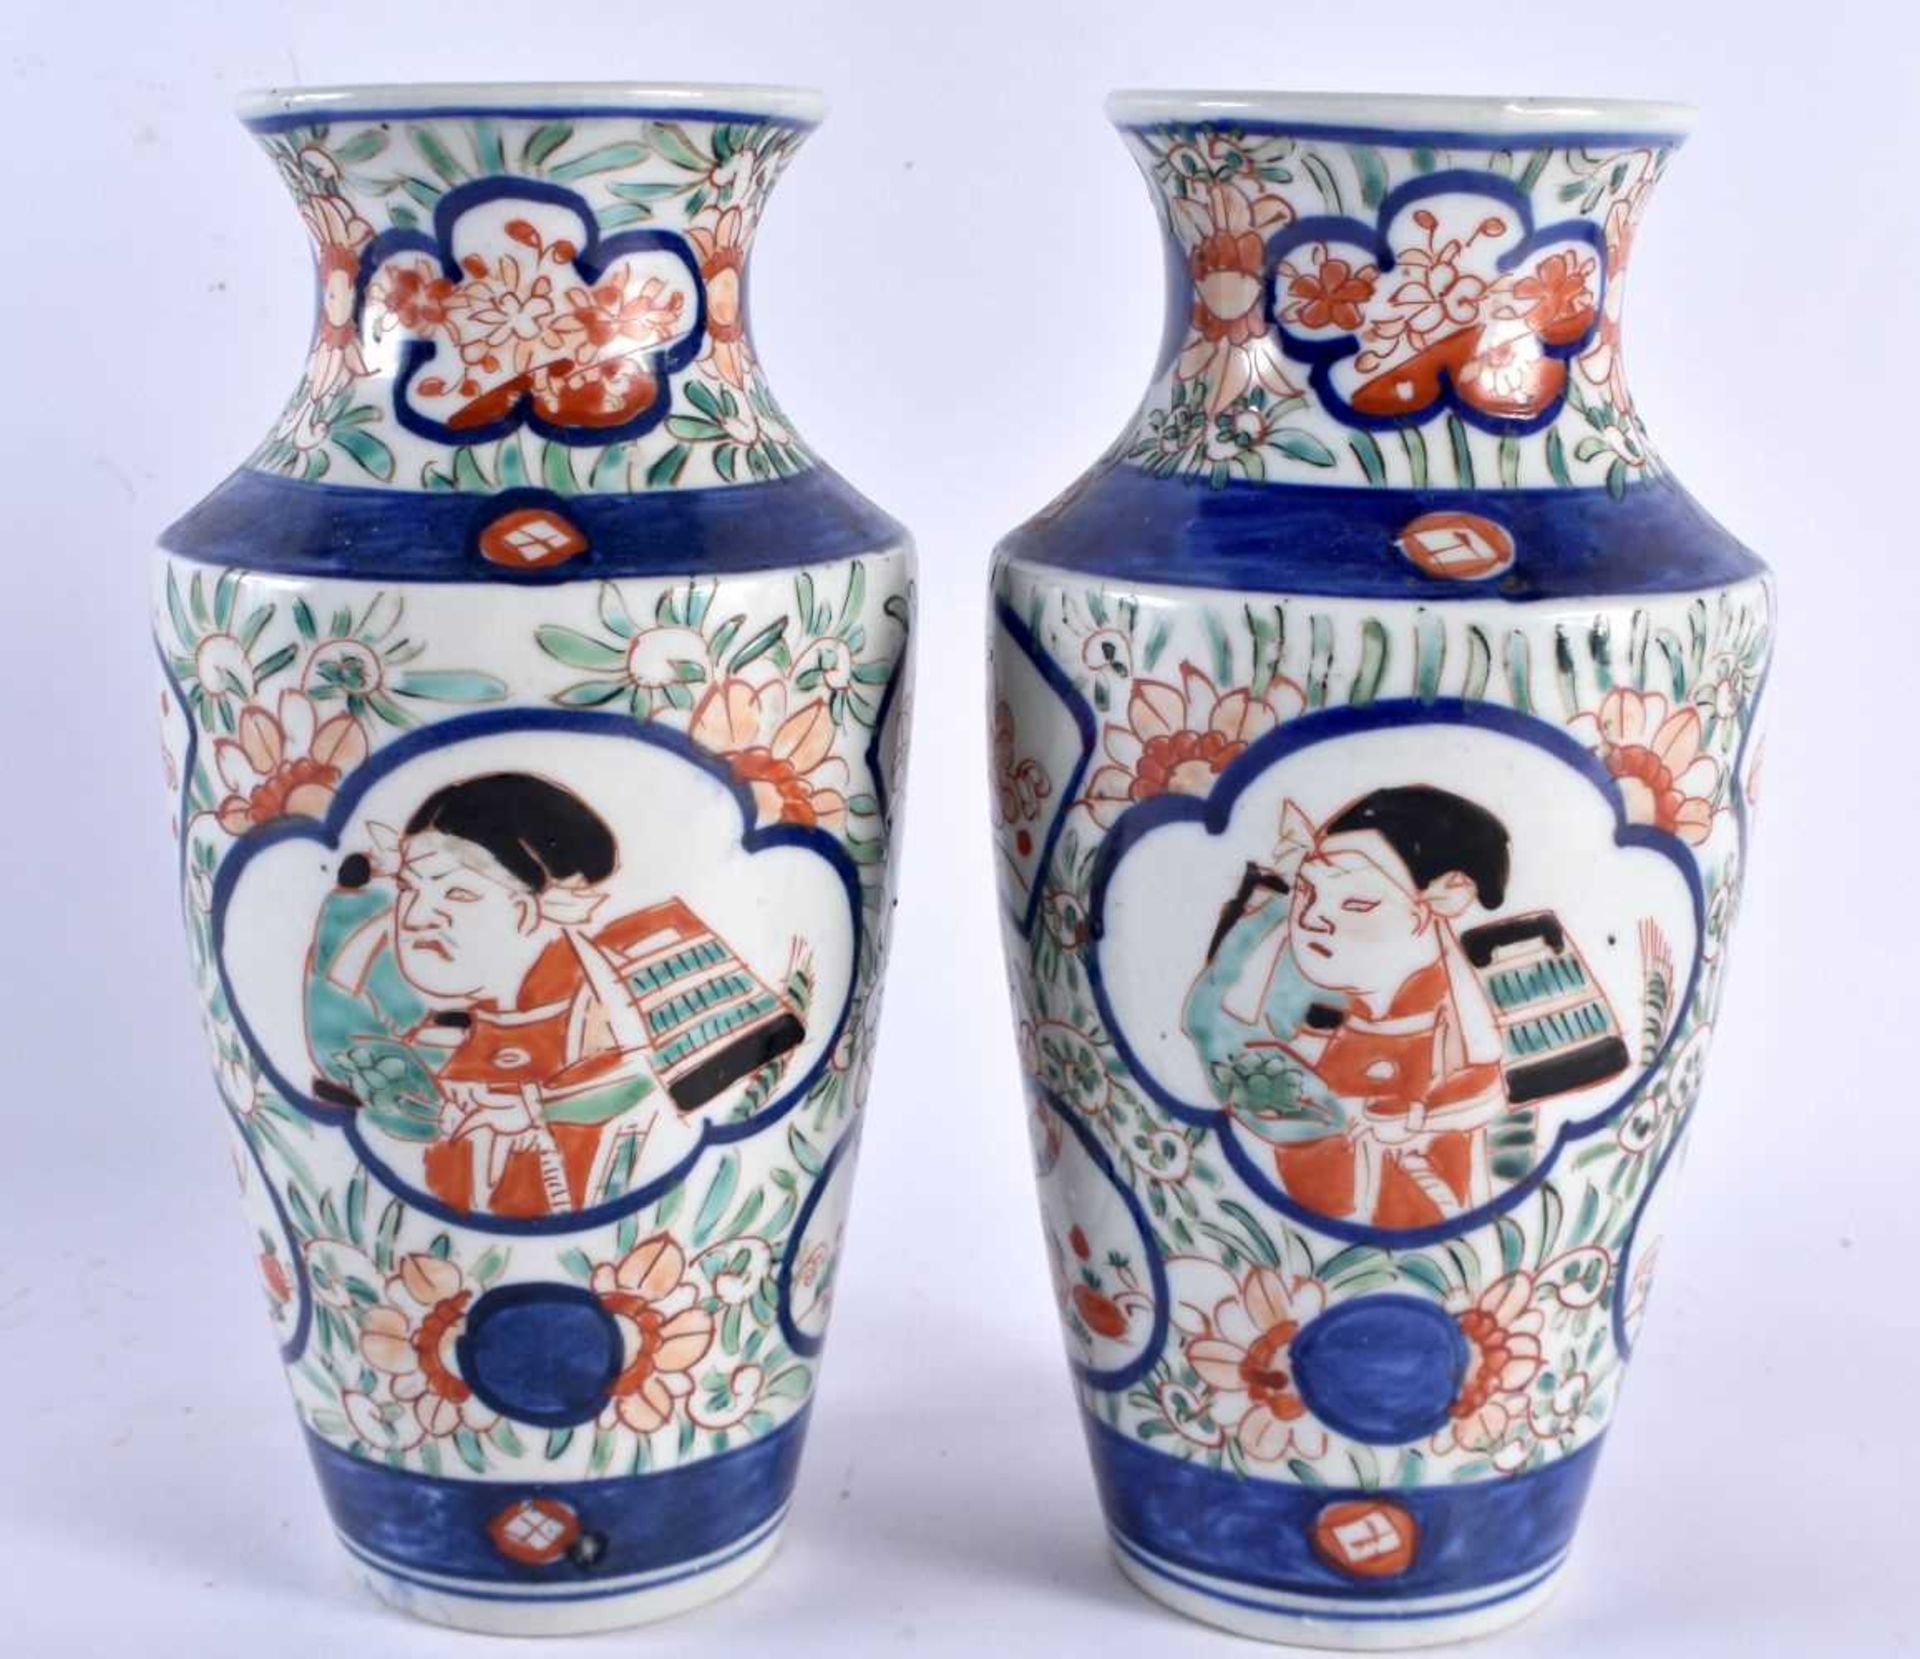 A PAIR OF 19TH CENTURY JAPANESE MEIJI PERIOD IMARI VASE painted with figures and foliage. 21 cm